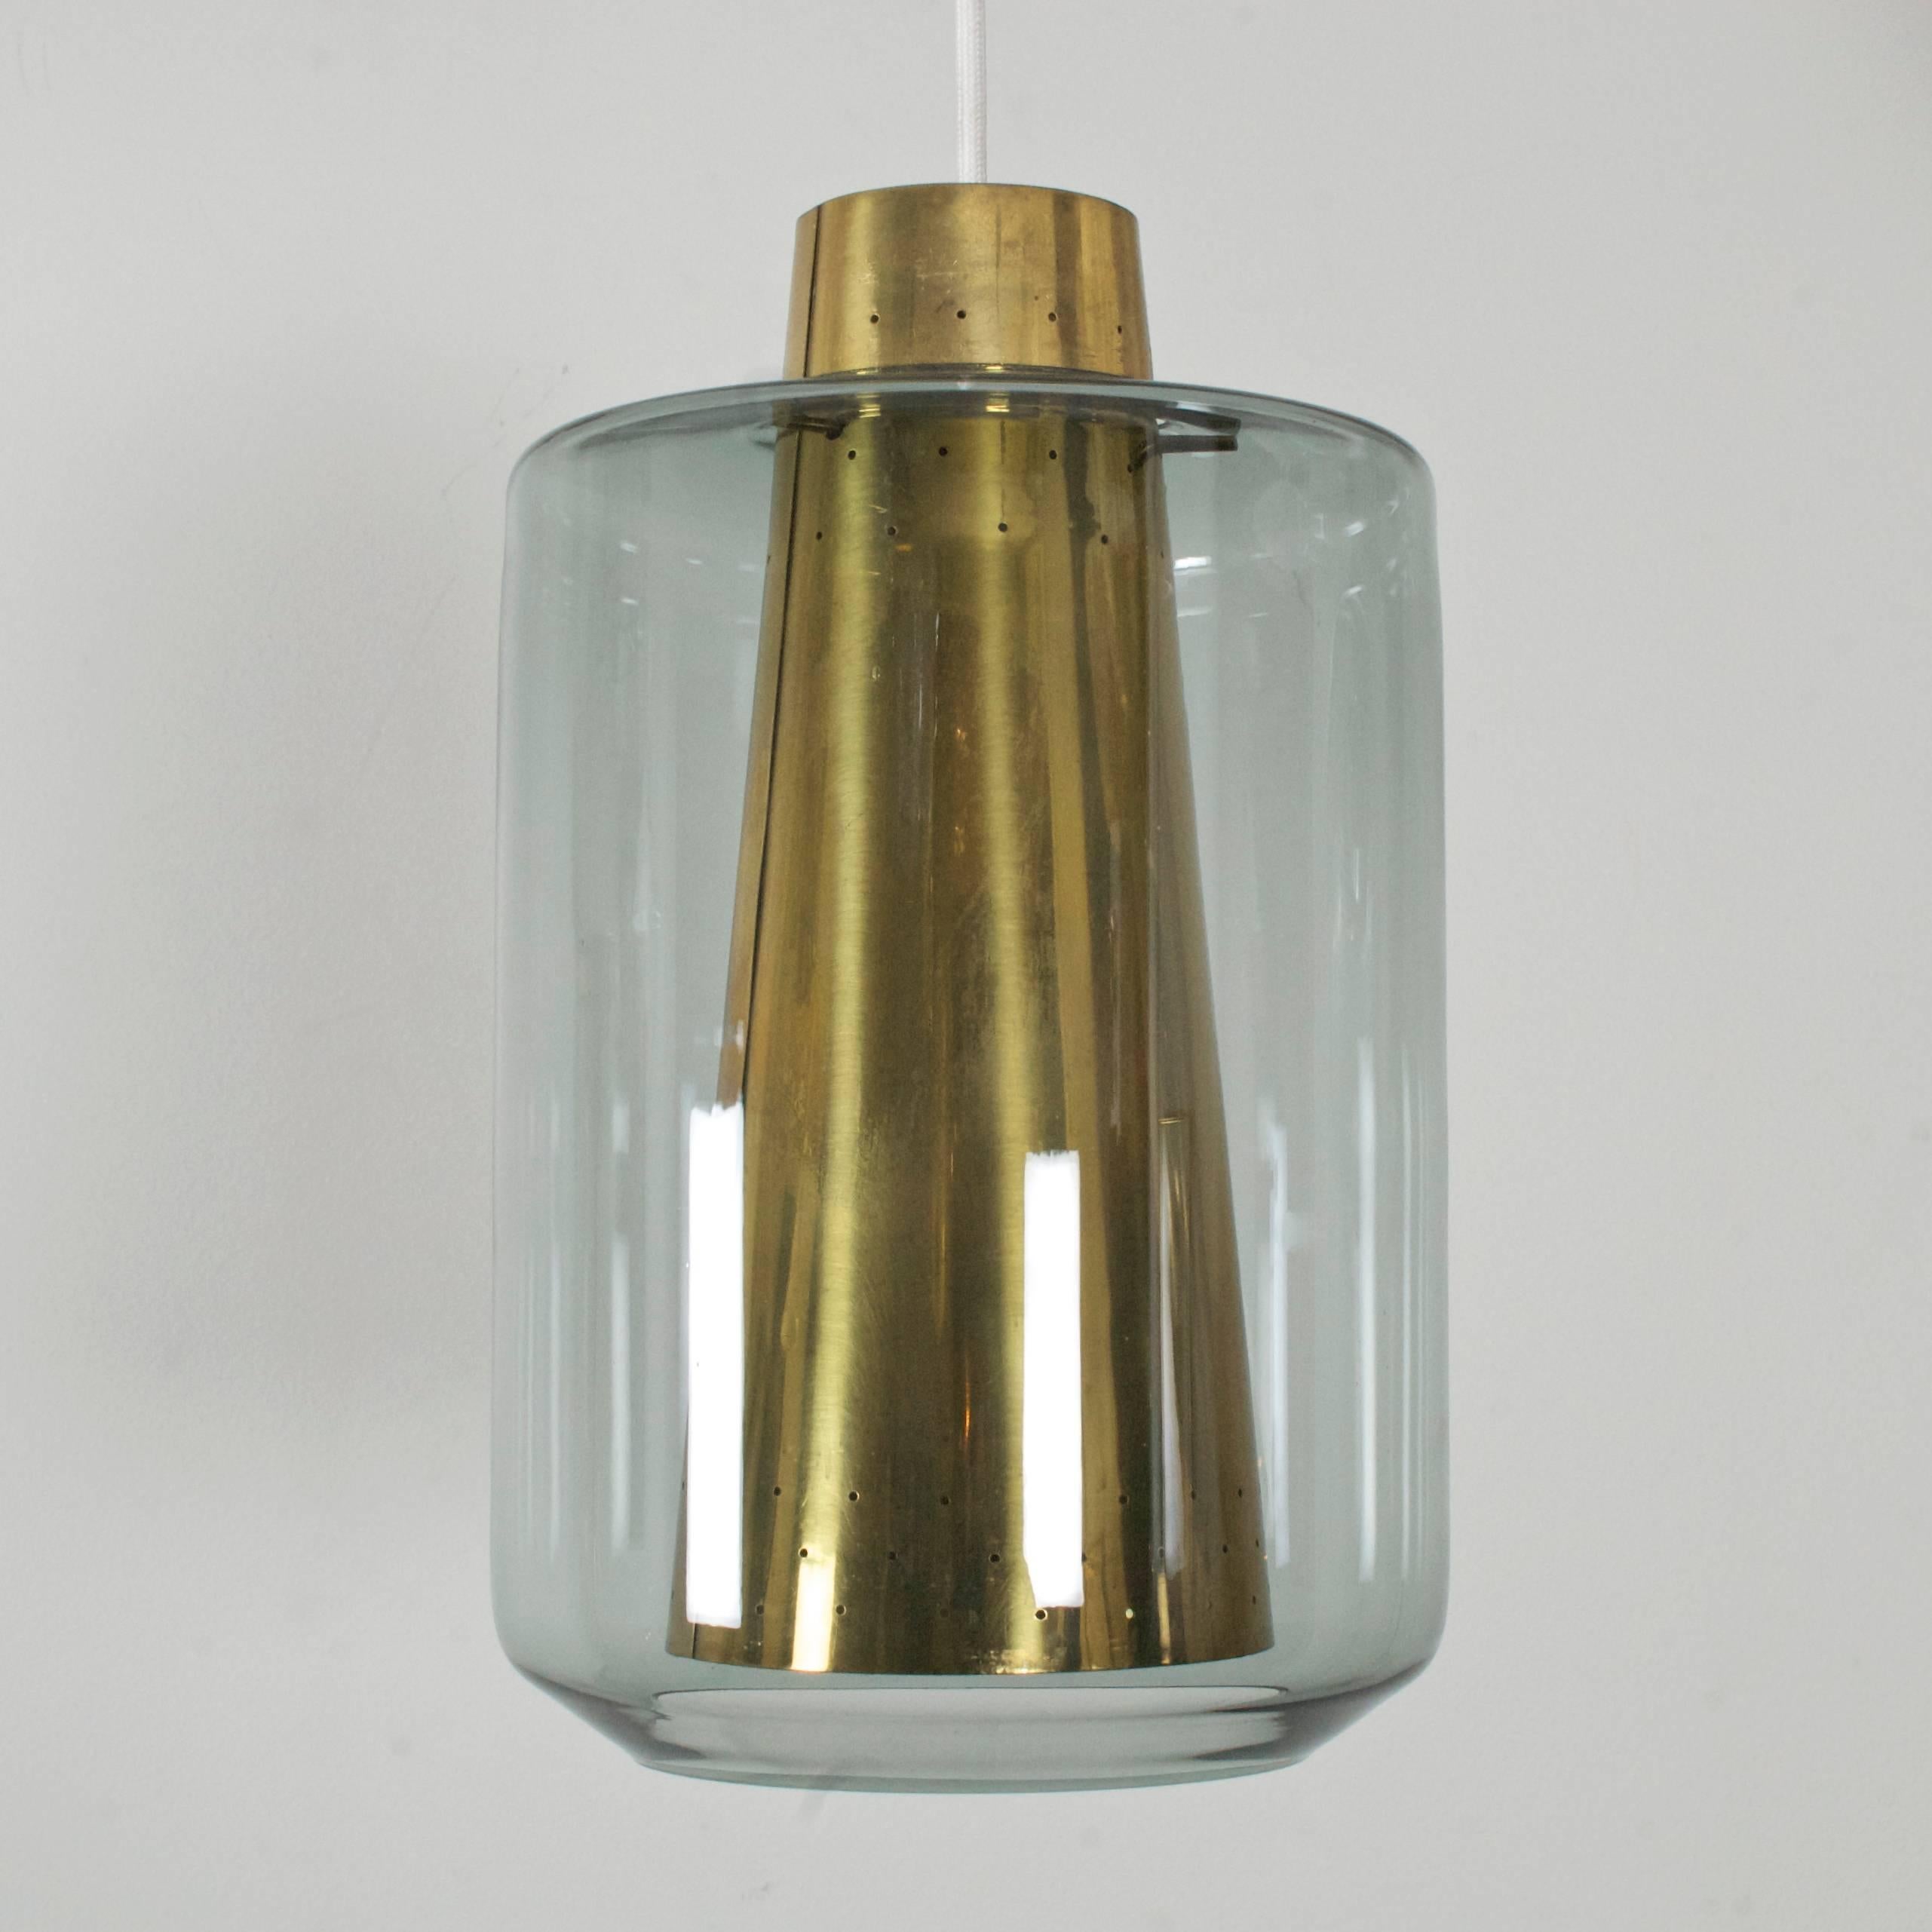 Art Glass Norwegian Brass and Glass Pendant Lamp Attributed to Arnold Wiig Fabrikker 1960s